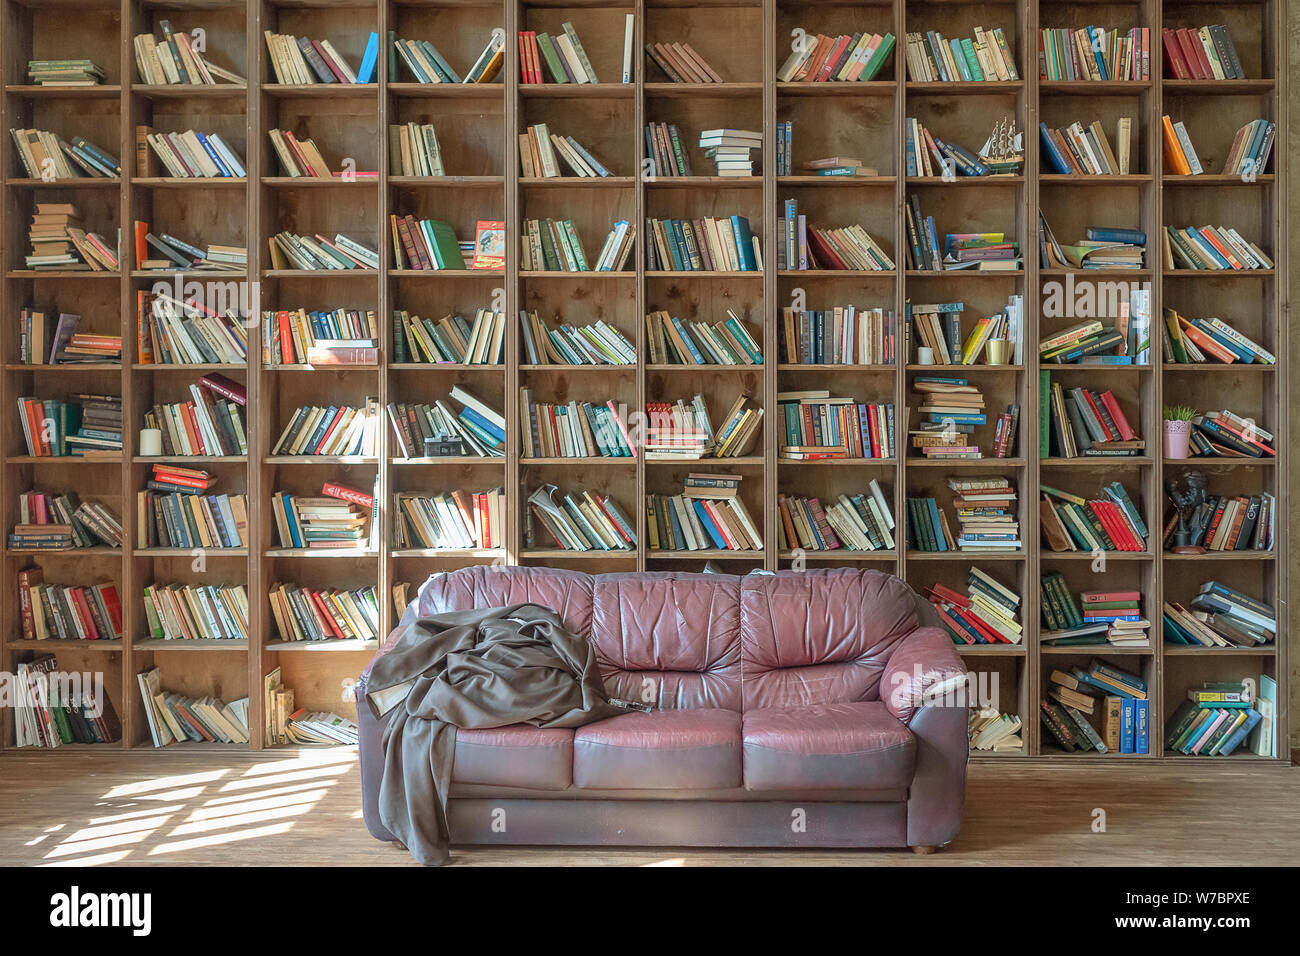 Huge Bookcase Stock Photos Huge Bookcase Stock Images Alamy